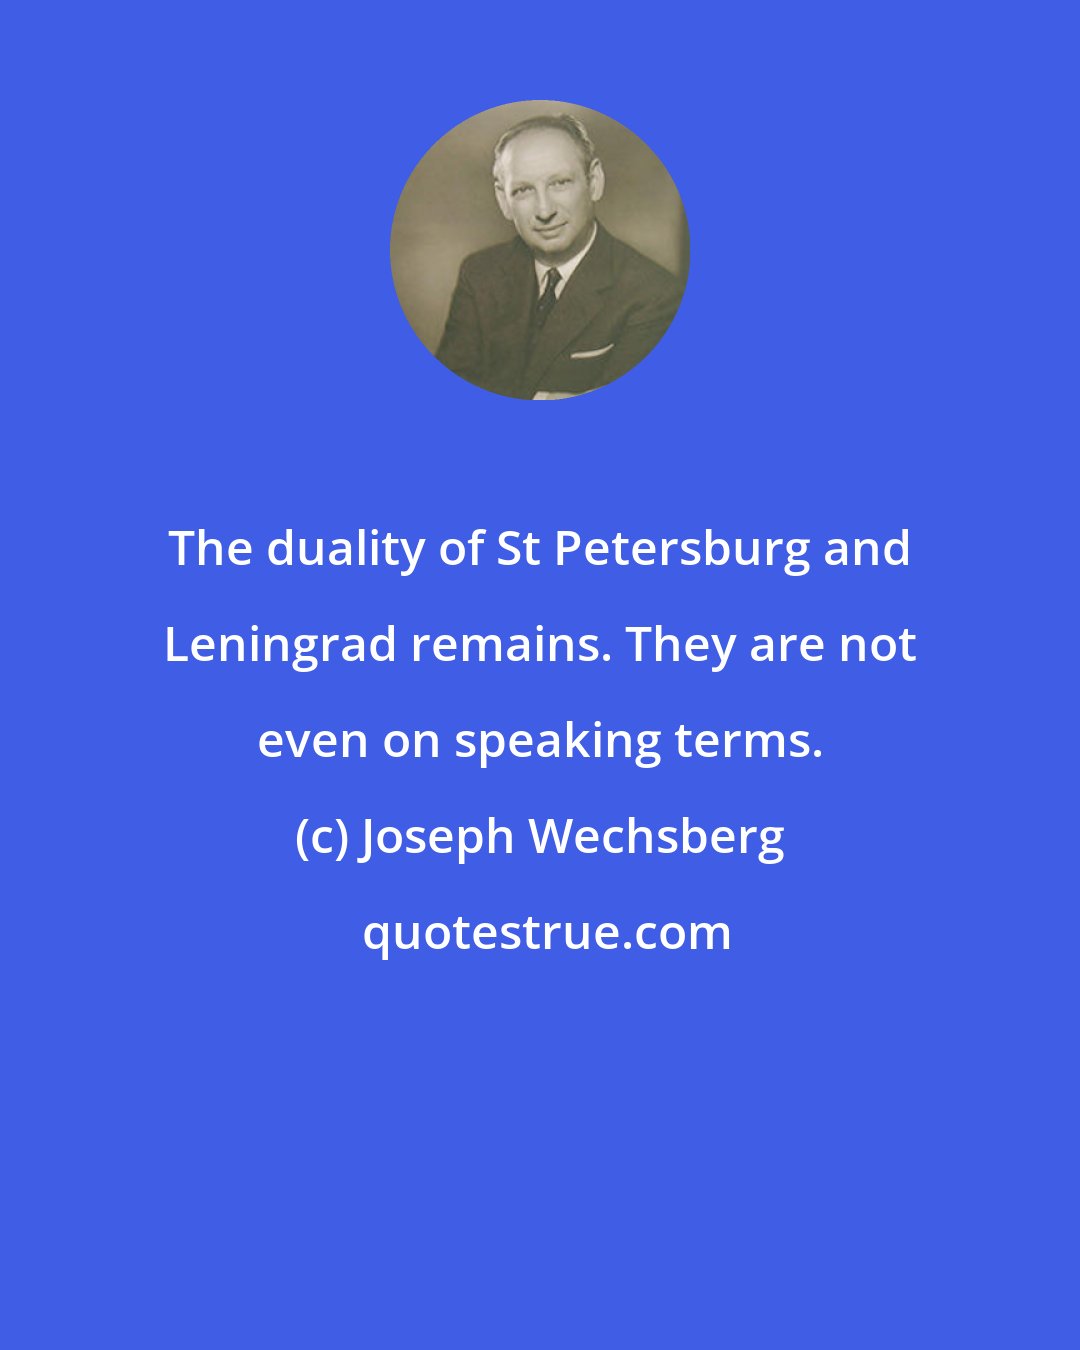 Joseph Wechsberg: The duality of St Petersburg and Leningrad remains. They are not even on speaking terms.